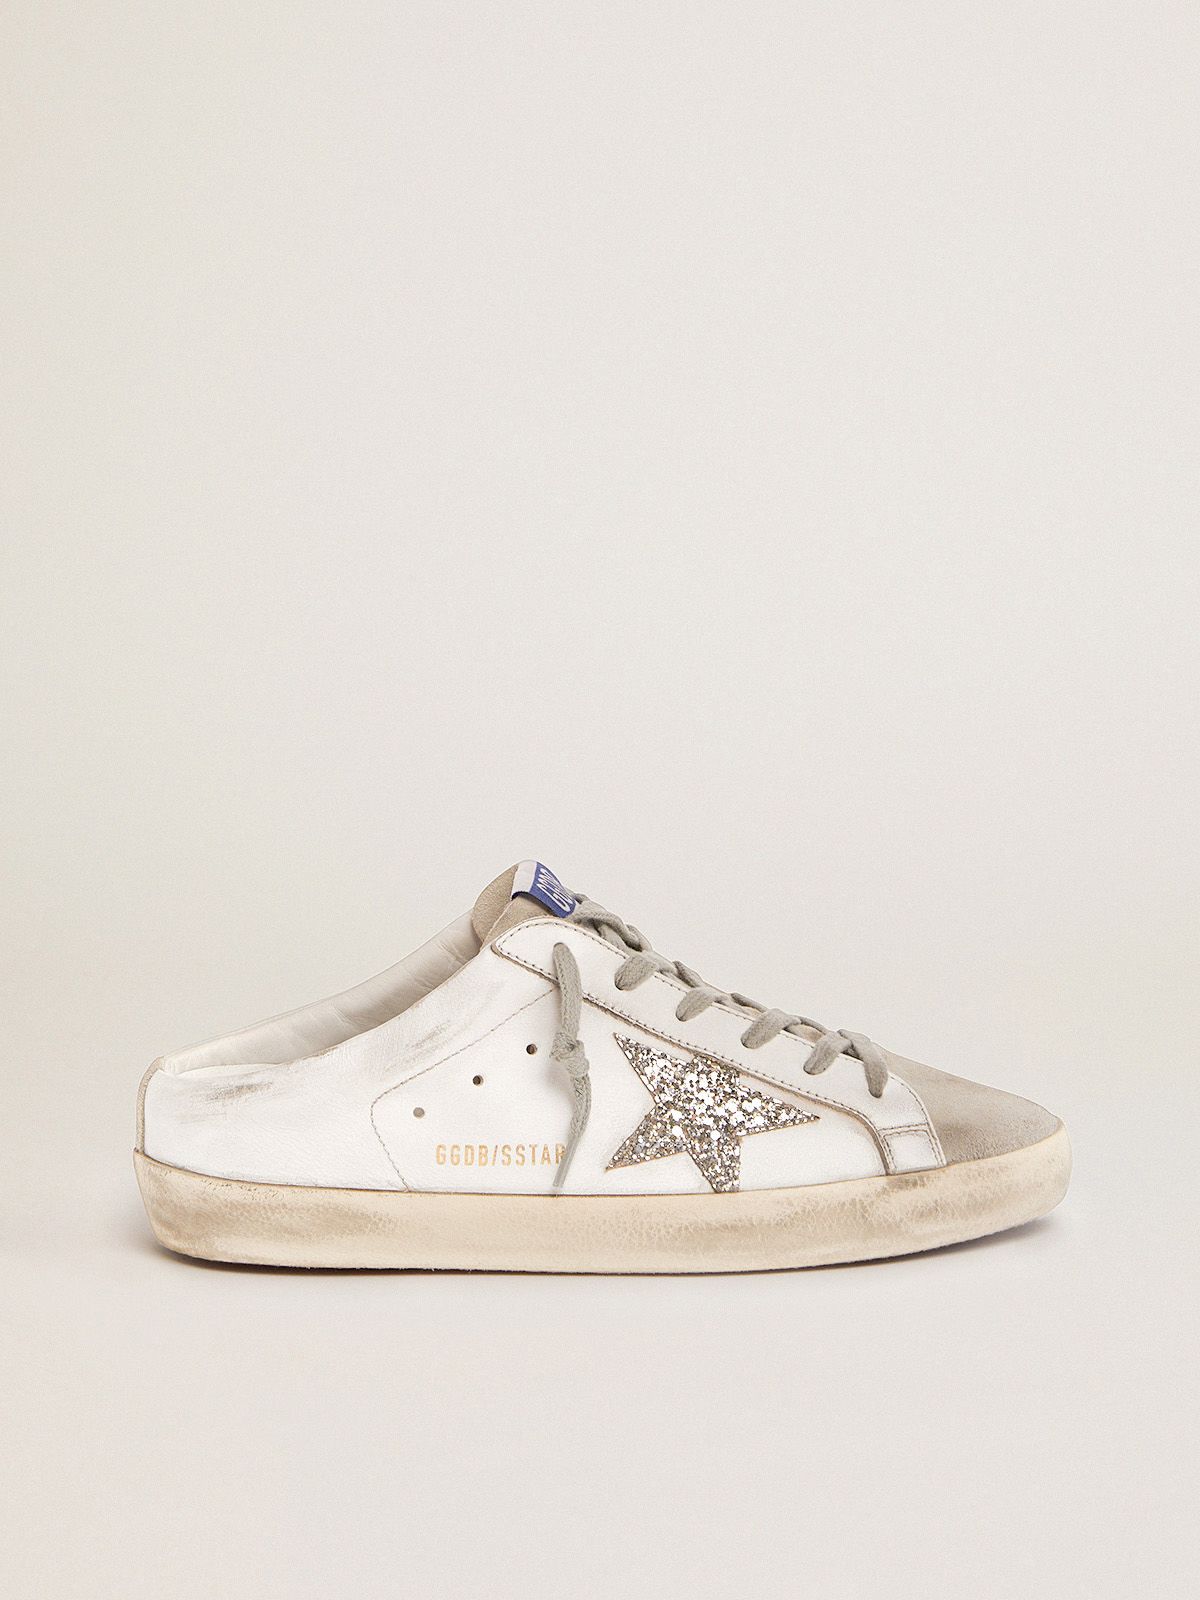 Golden Goose Stardan Super-Star Sabots in white leather and gray suede with silver glitter star